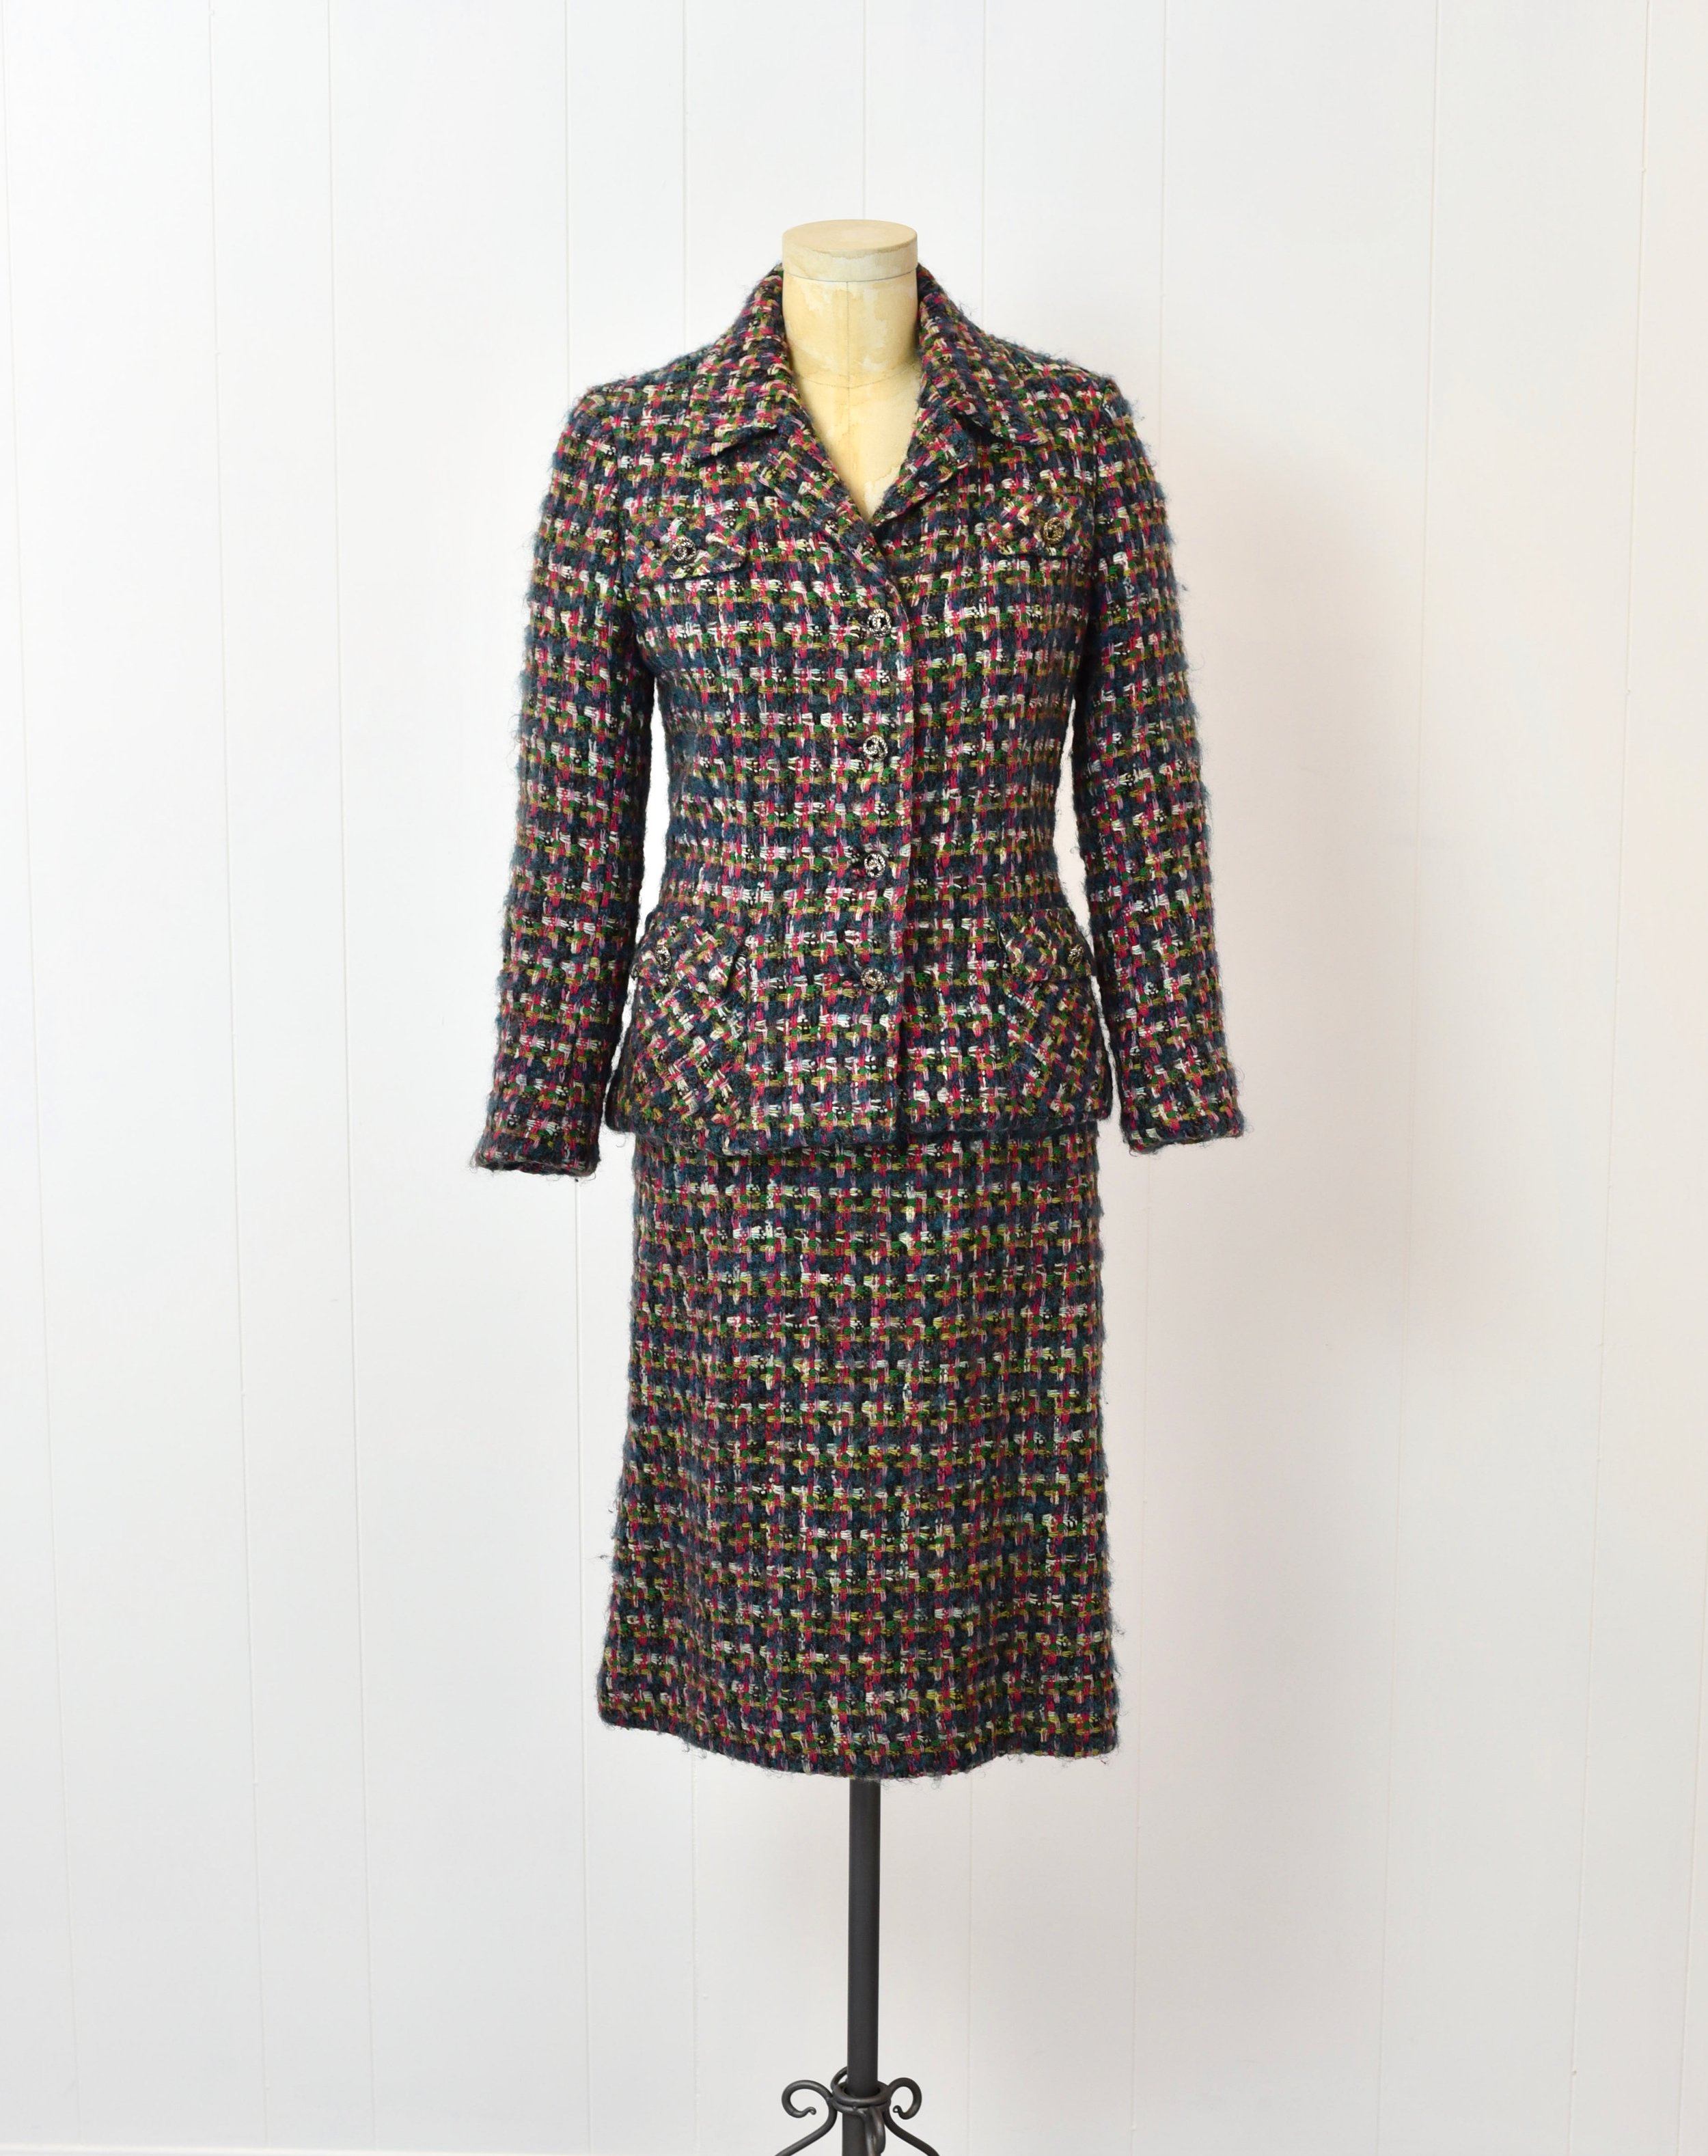 SHEIN Young Girl Plaid Tweed Jacket & Contrast Trim Skirt